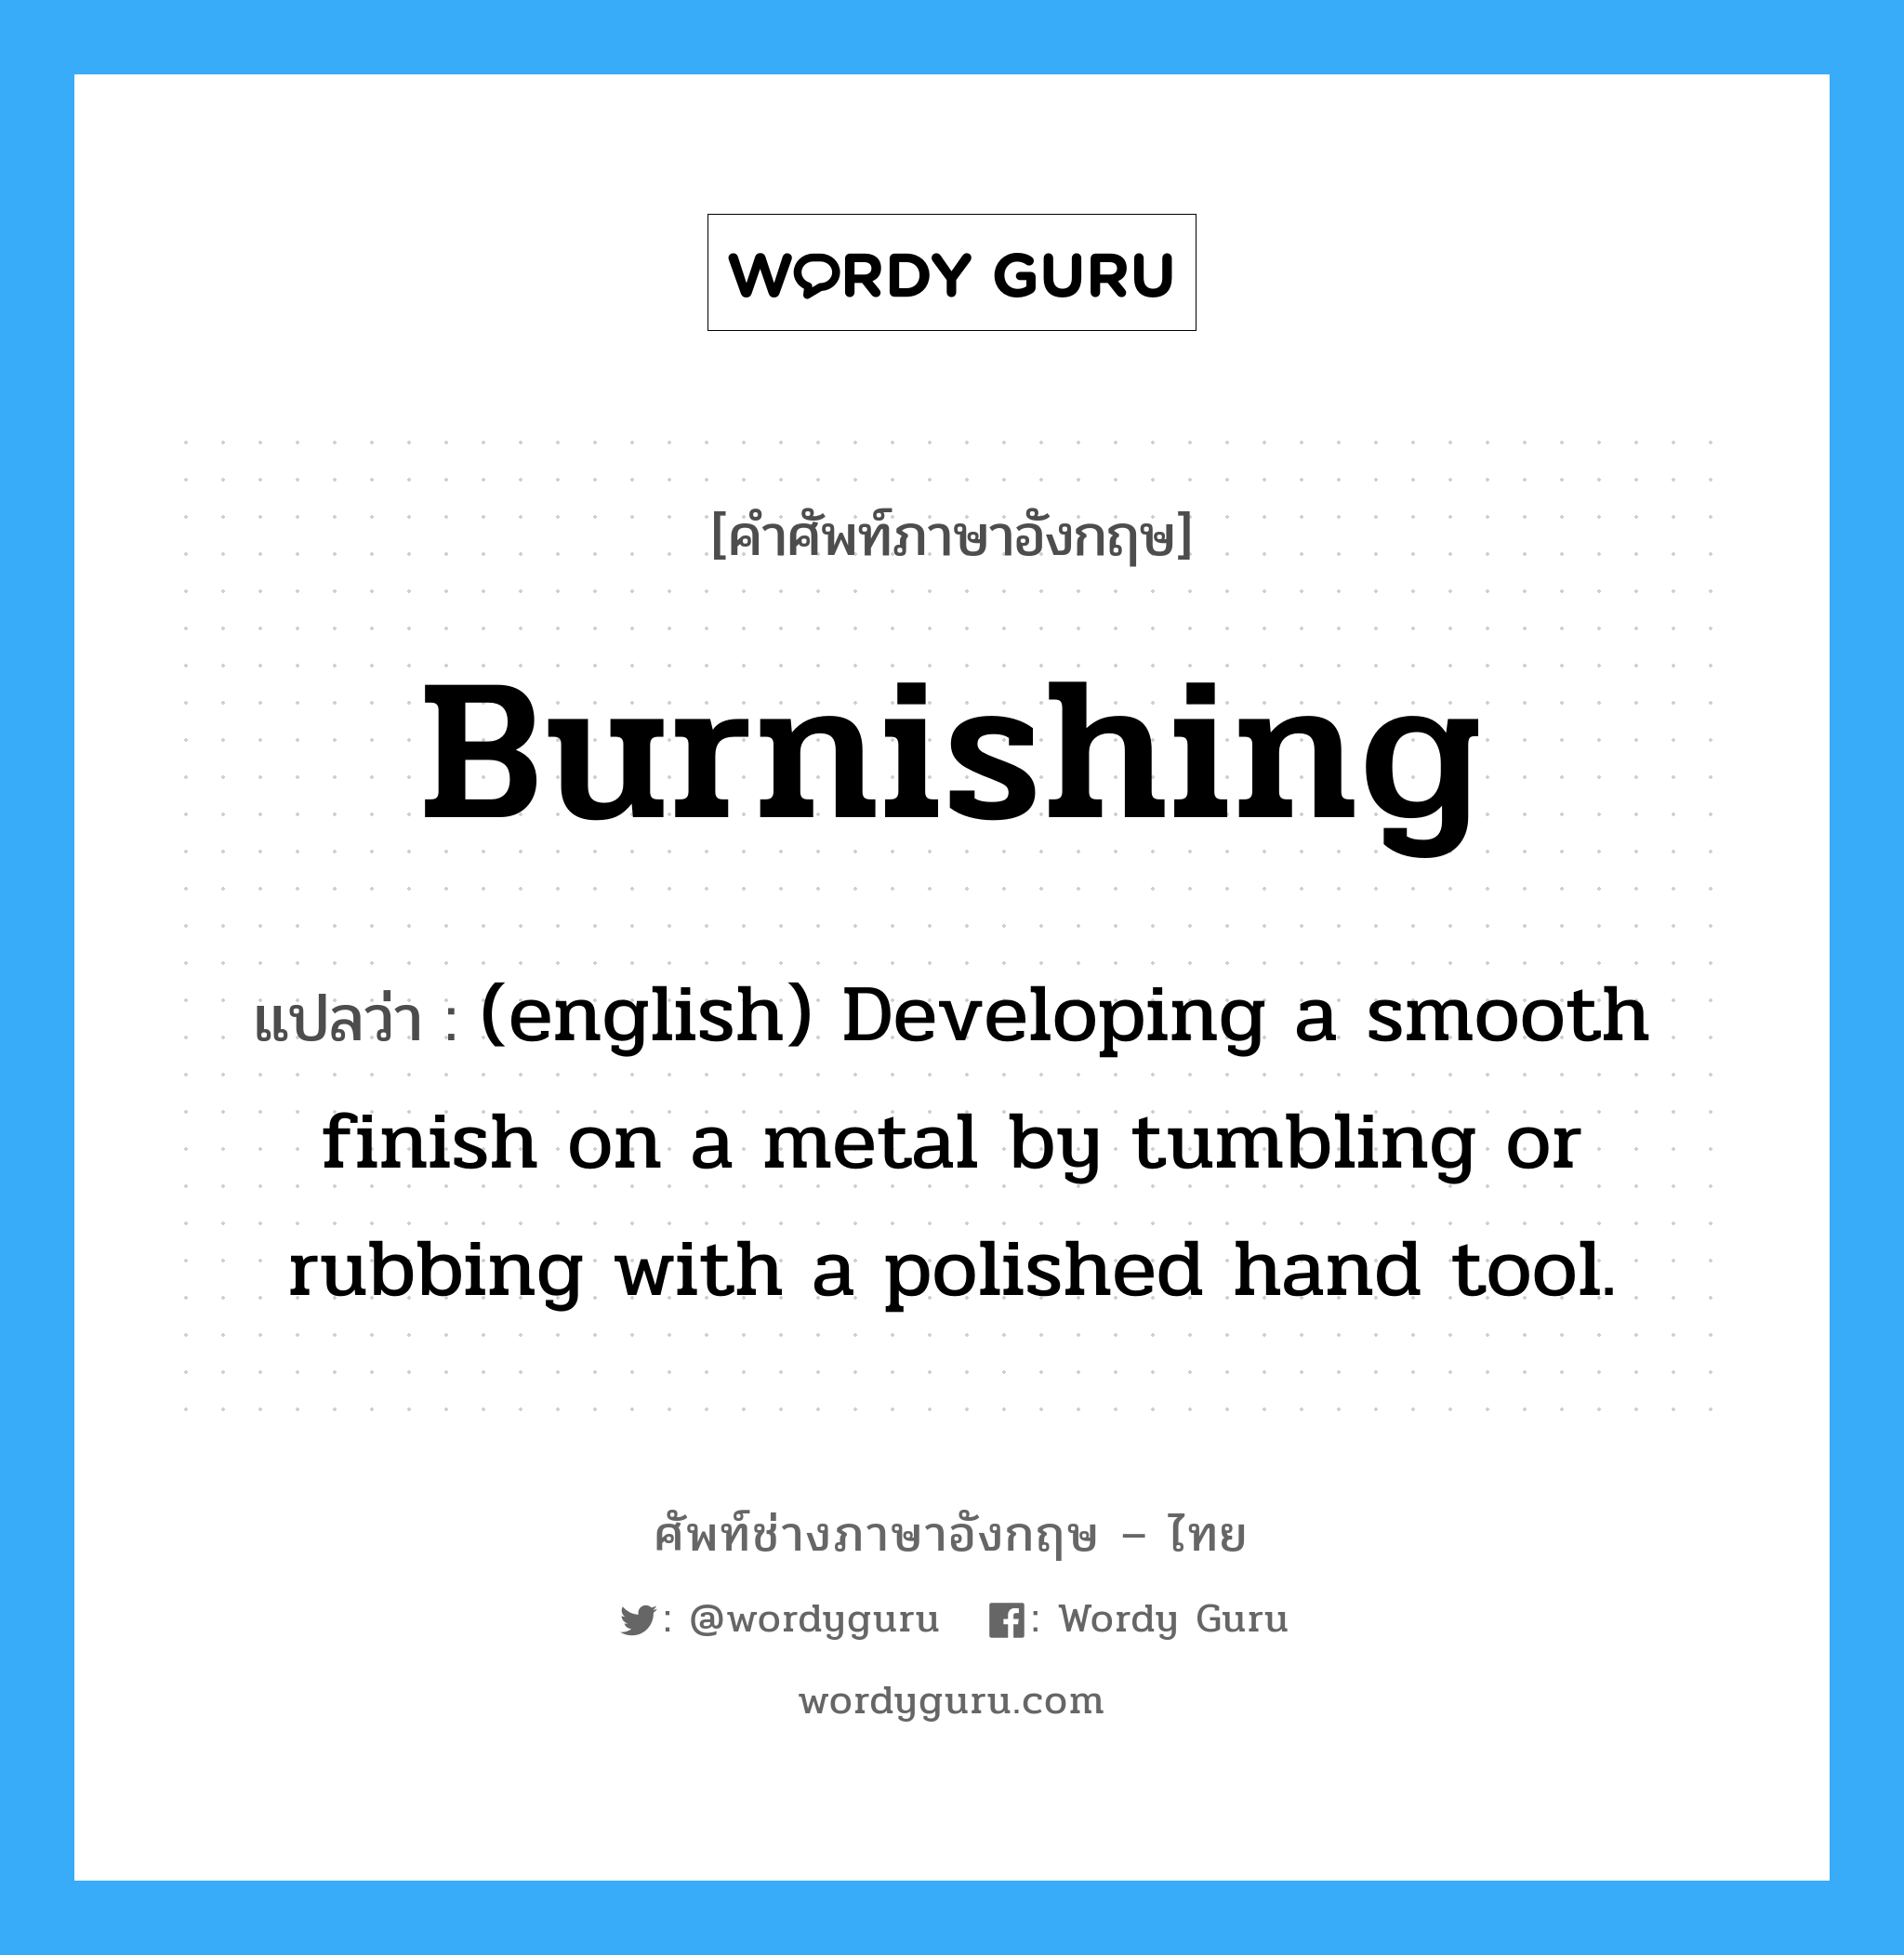 (english) Developing a smooth finish on a metal by tumbling or rubbing with a polished hand tool. ภาษาอังกฤษ?, คำศัพท์ช่างภาษาอังกฤษ - ไทย (english) Developing a smooth finish on a metal by tumbling or rubbing with a polished hand tool. คำศัพท์ภาษาอังกฤษ (english) Developing a smooth finish on a metal by tumbling or rubbing with a polished hand tool. แปลว่า Burnishing